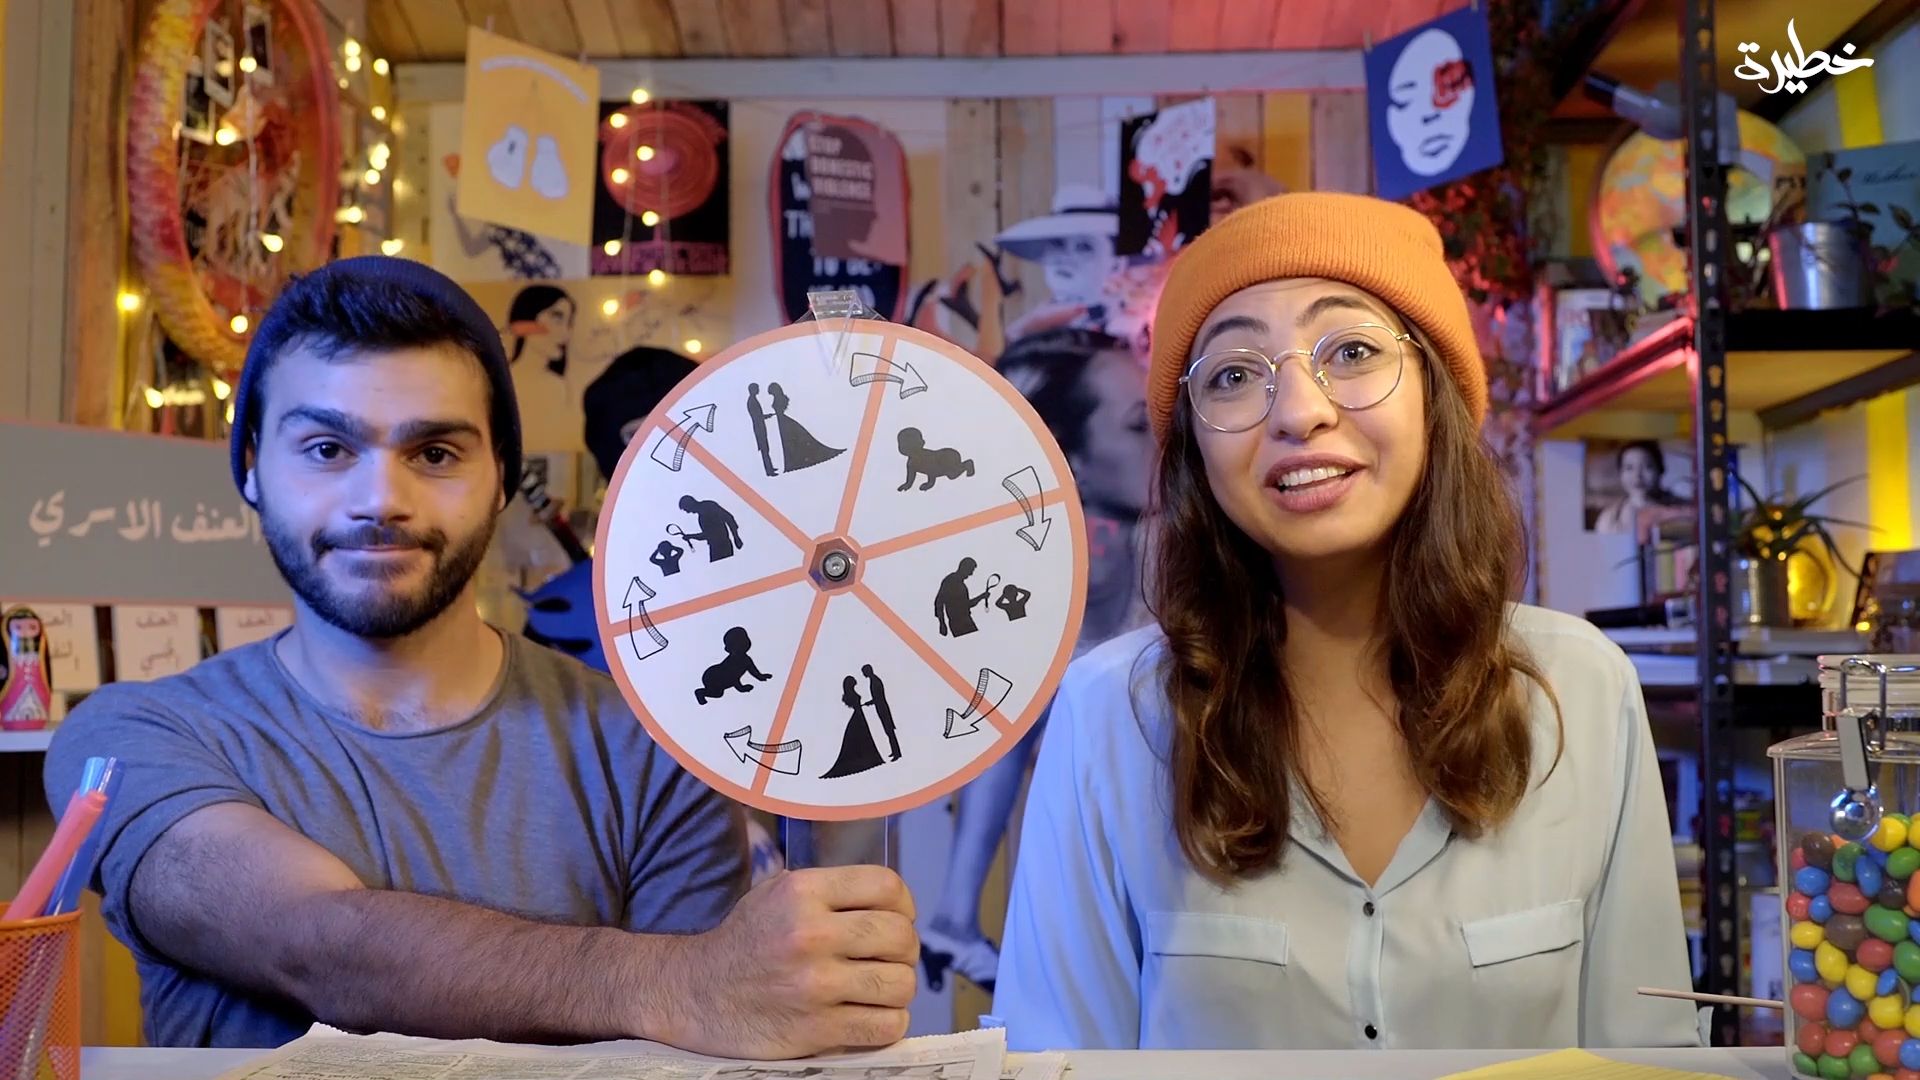 The final episode of Smi'touha Minni tackles men's issues (Courtesy of Amanda Abou Abdallah)